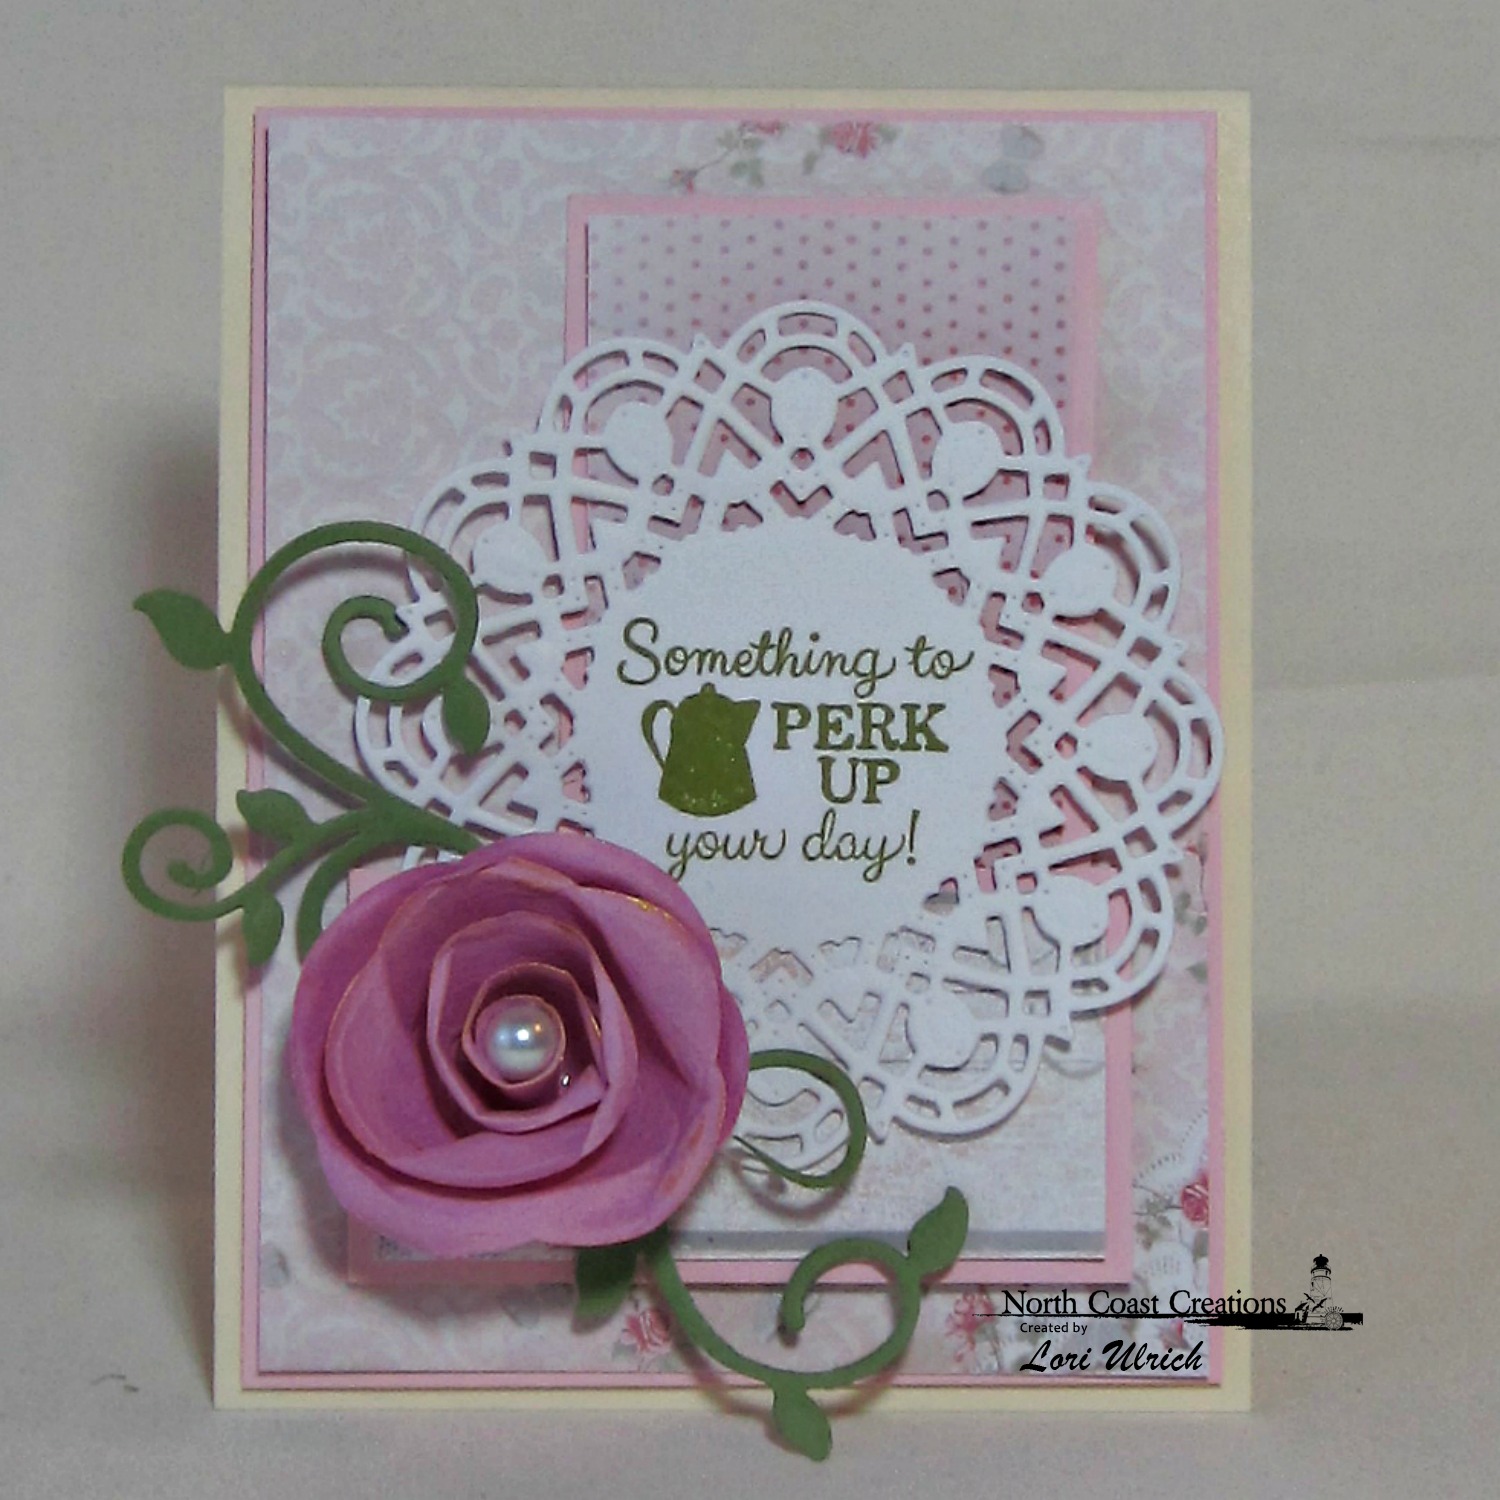 Stamps - North Coast Creations What's Brewin'?, Our Daily Bread Designs Custom Doily Dies, ODBD Shabby Rose Paper Collection, ODBD Custom Fancy Foliage Die